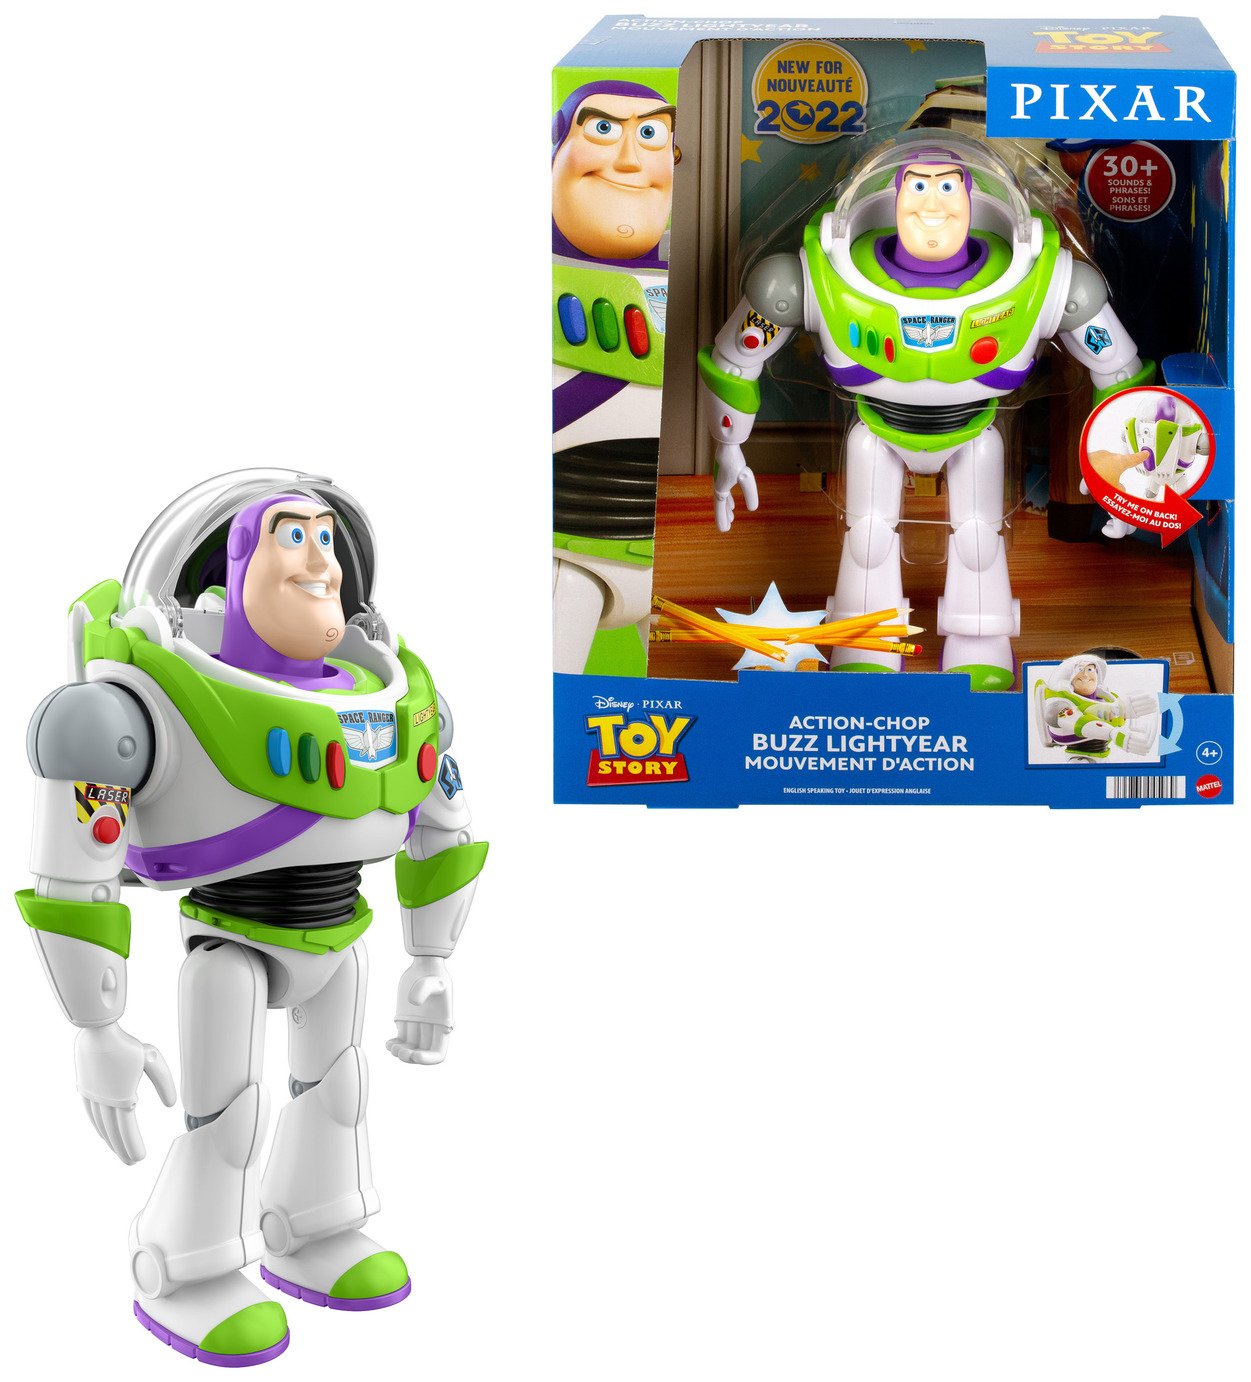 Toy Story Buzz Lightyear Action-Chop Talking Figure